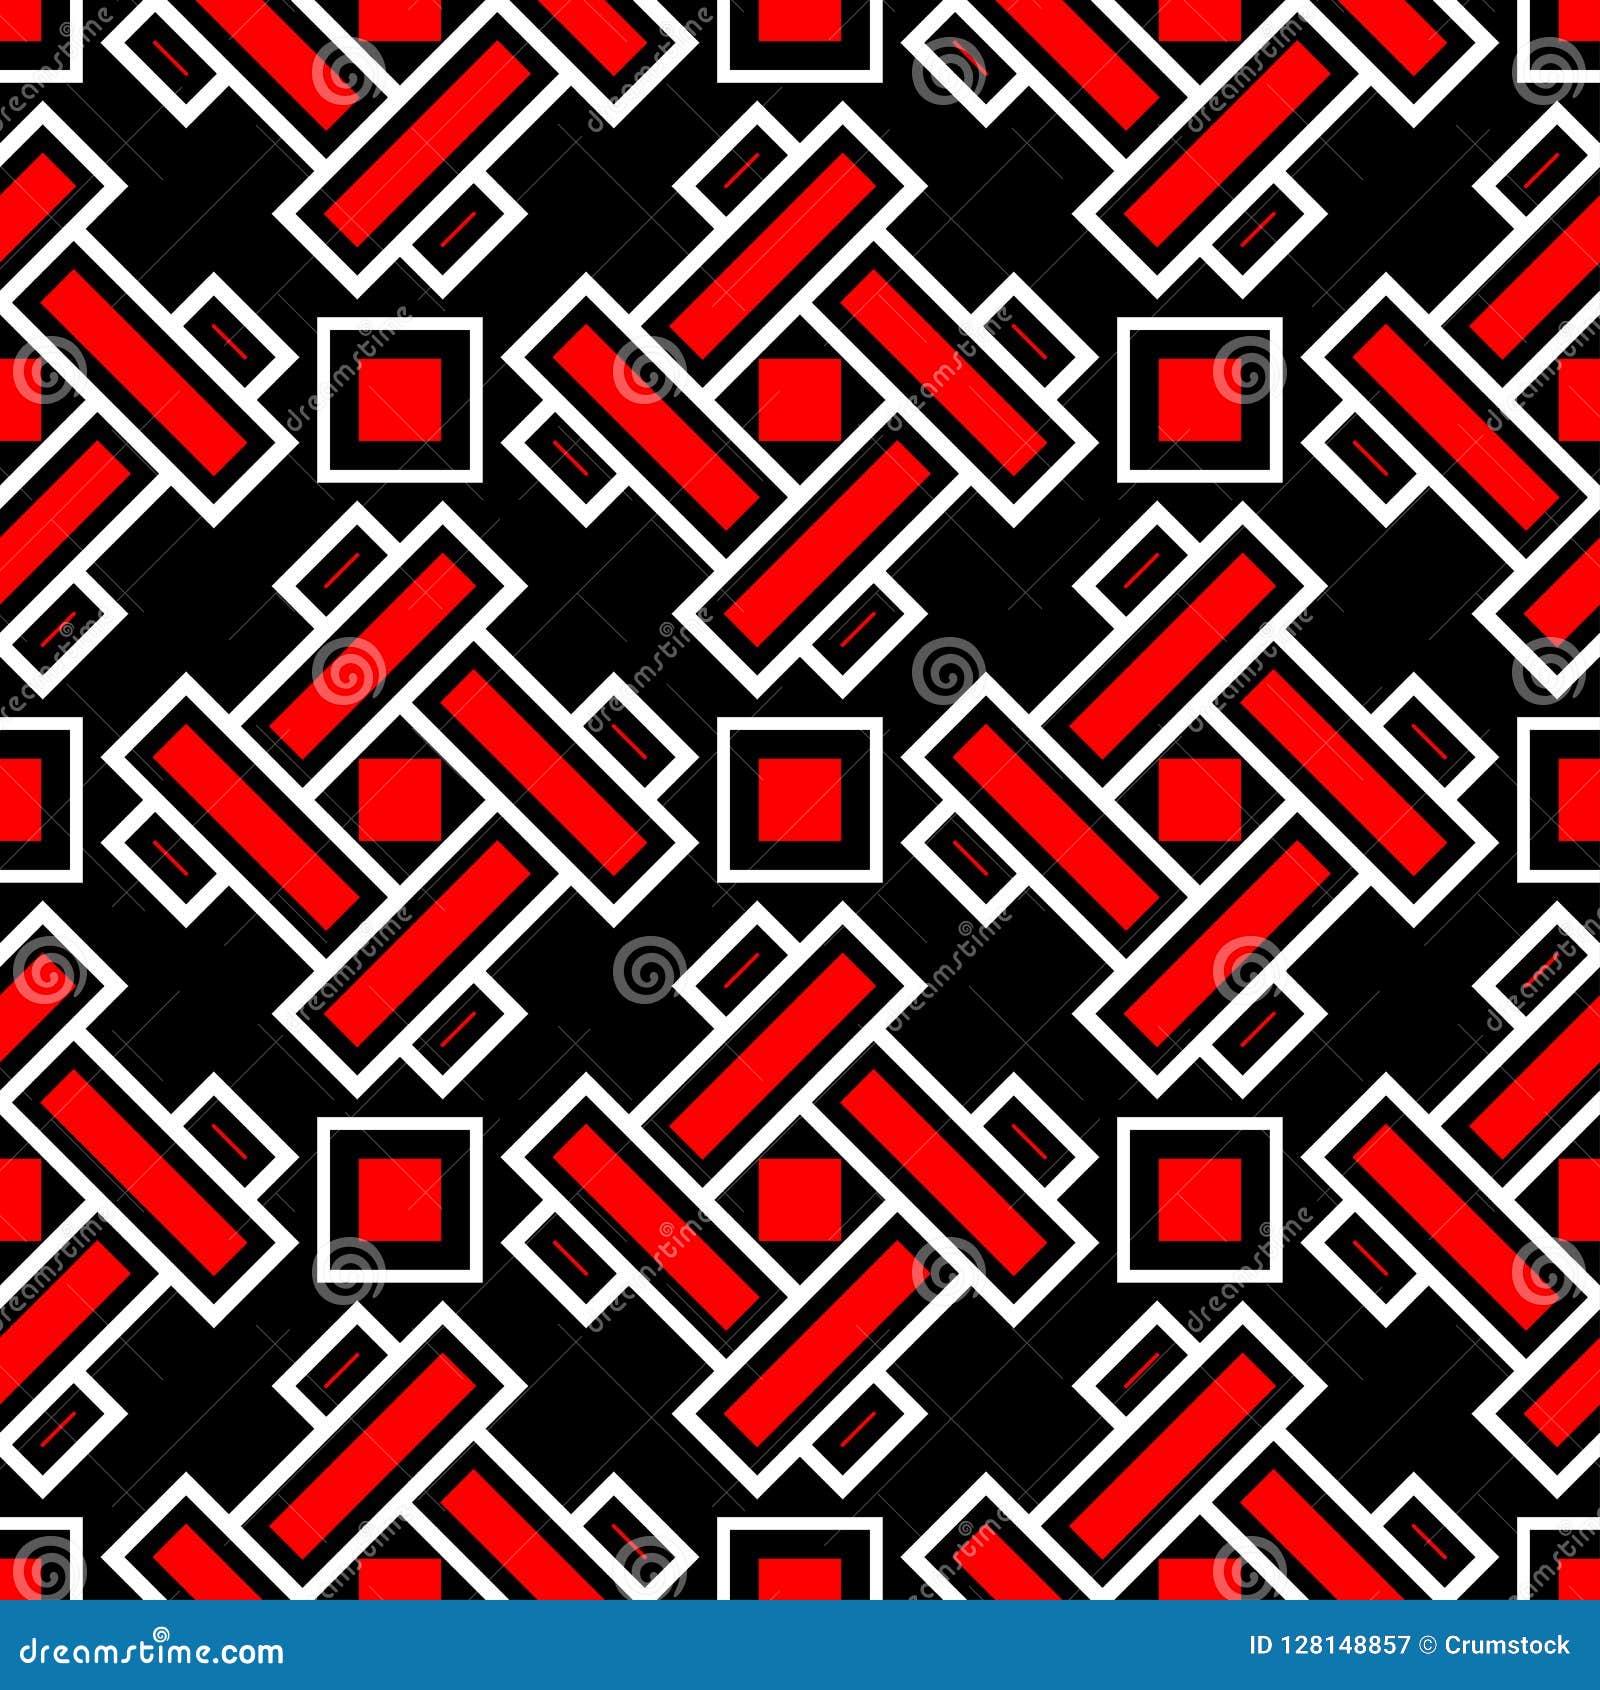 Geometric Seamless Pattern. Red and White Elements on Black Background ...